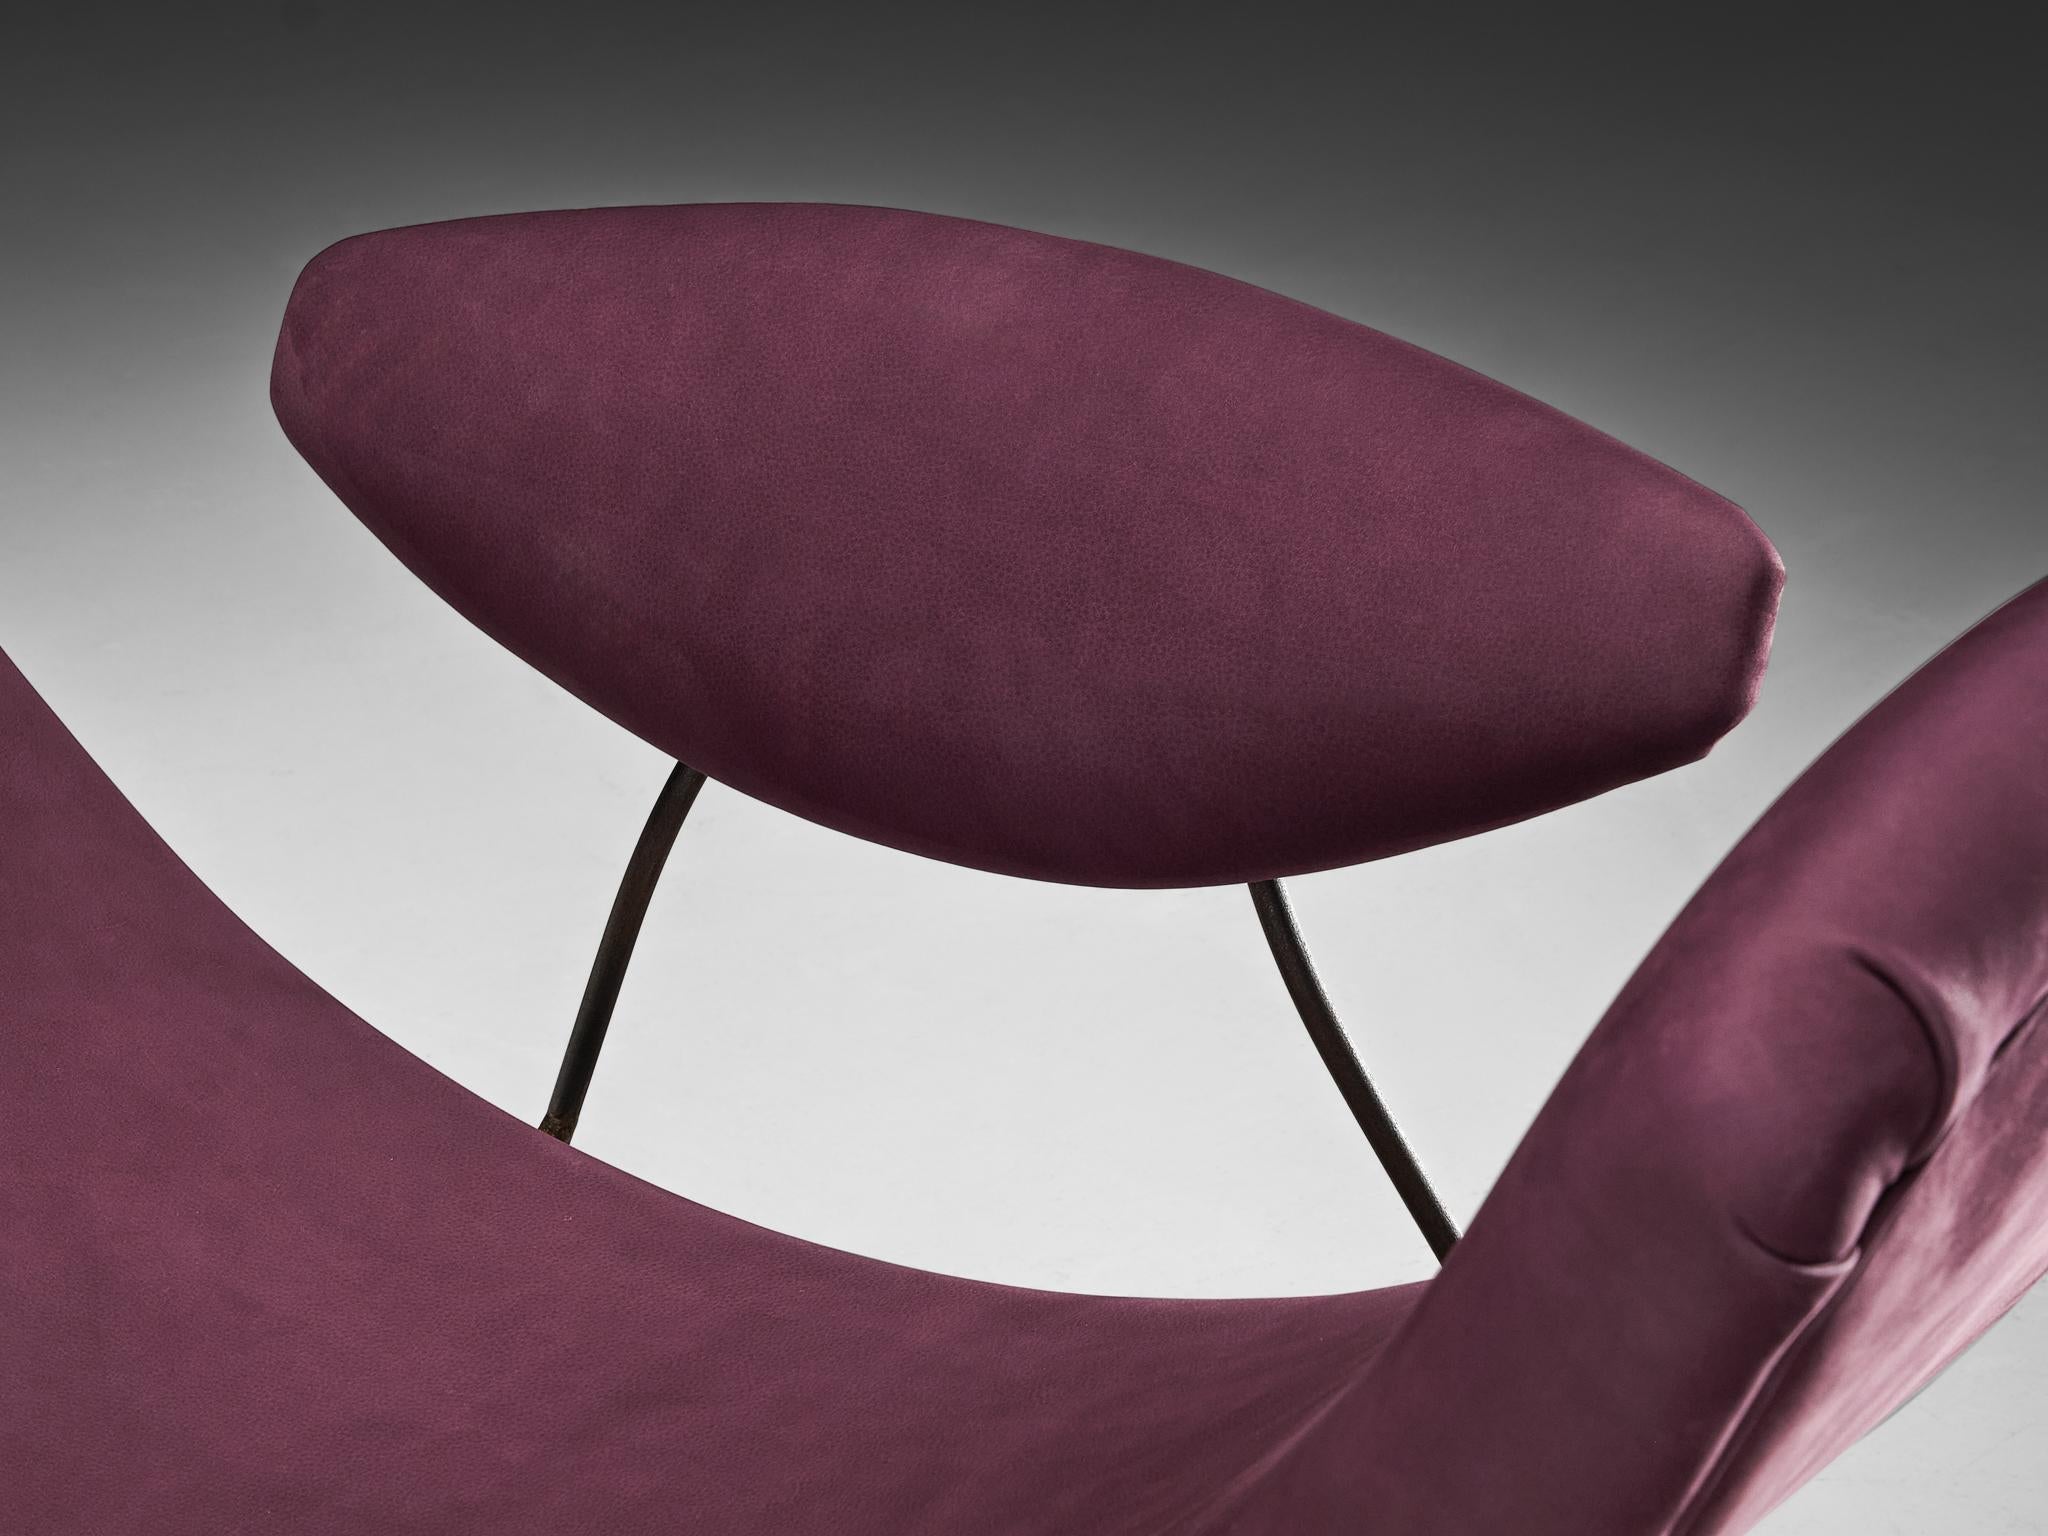 Martin Eisler & Carlo Hauner Early Edition 'Reversible' Chairs in Leather